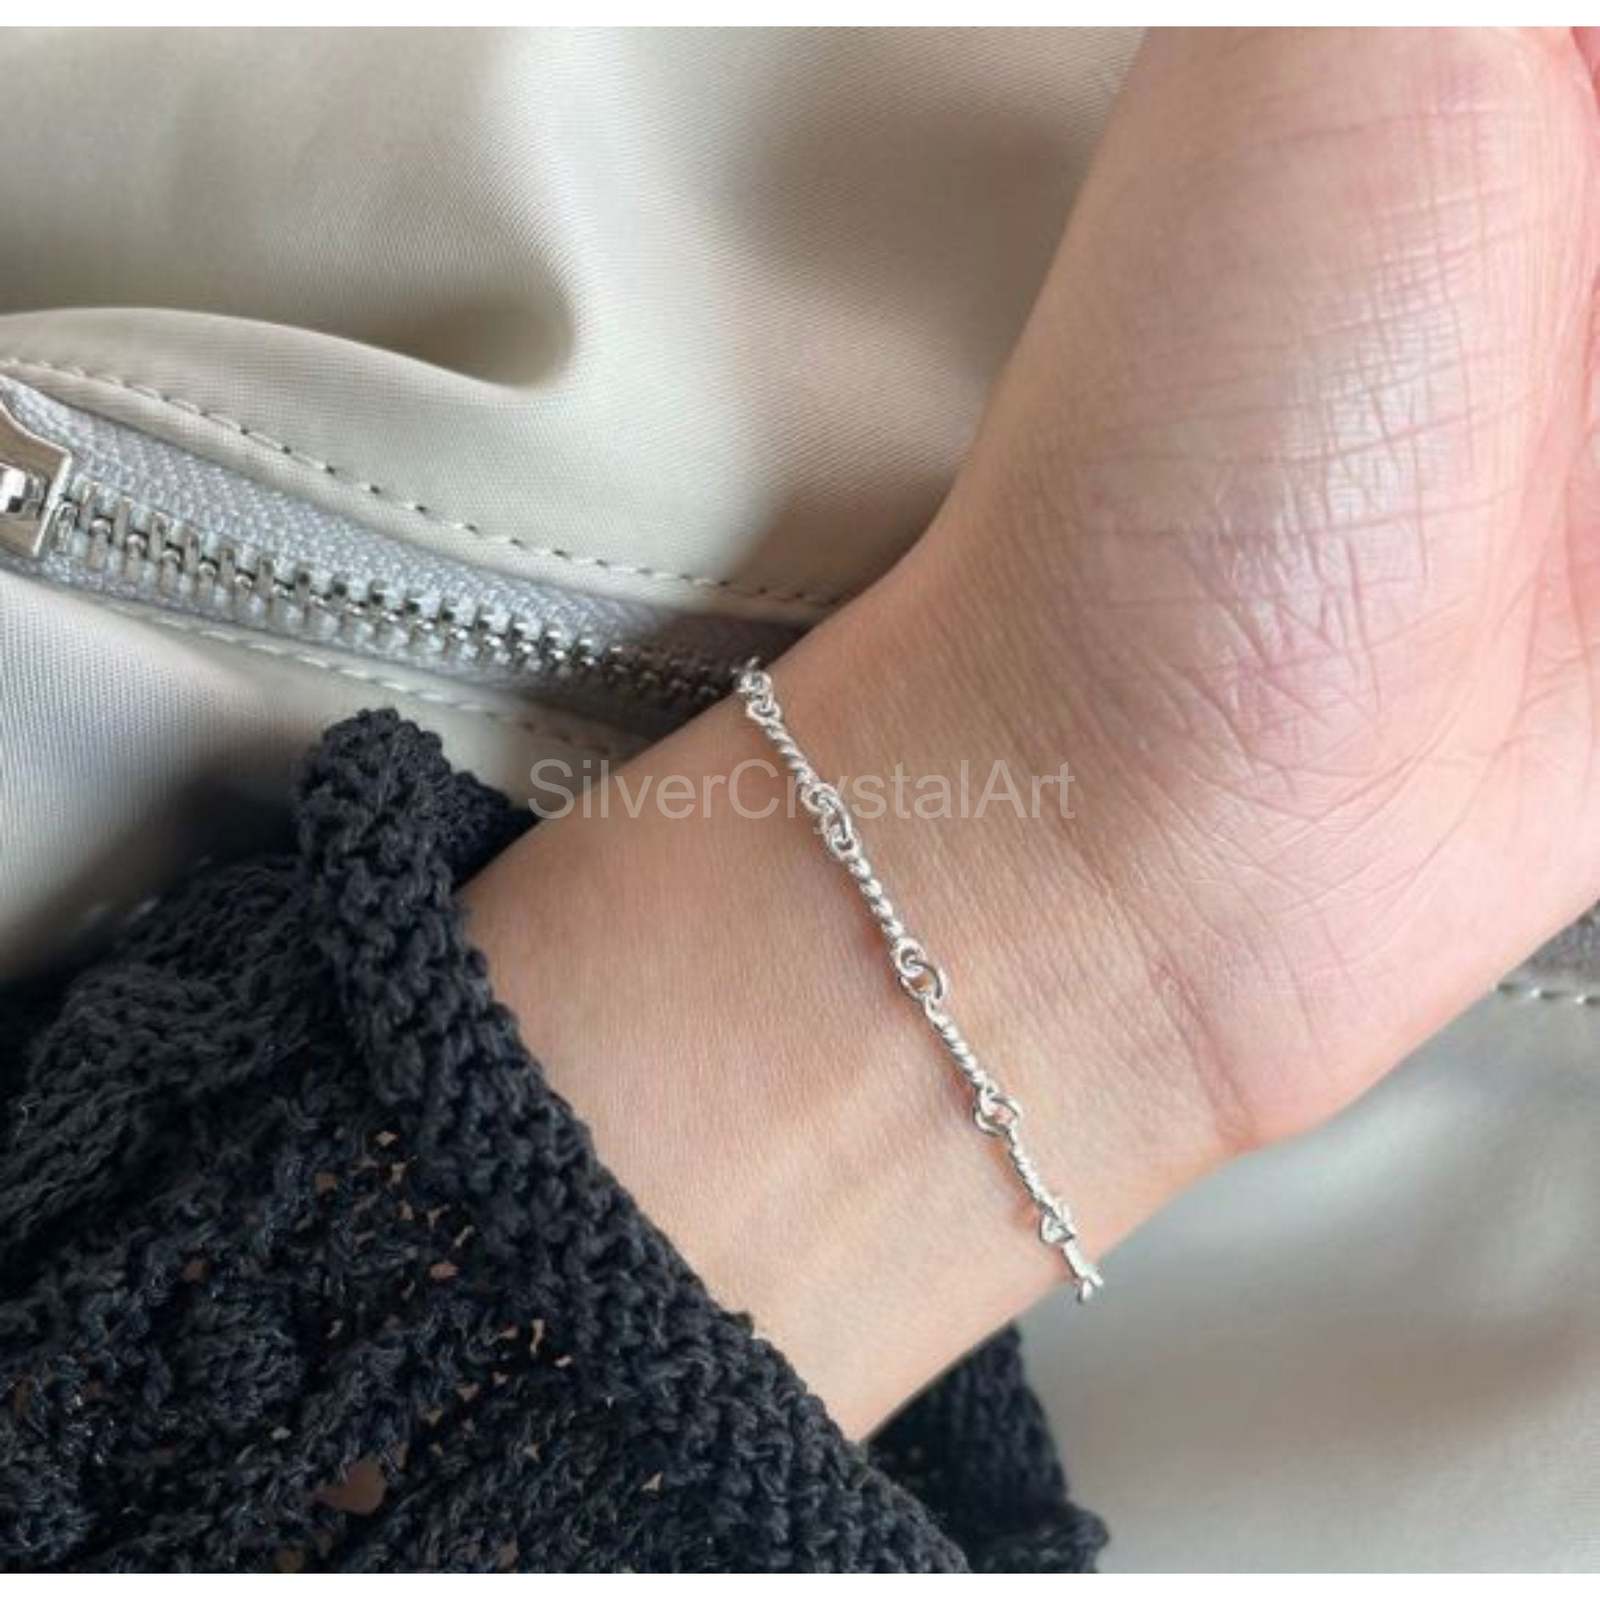 Fashion Twisted Chain 925 Sterling Silver Bracelet